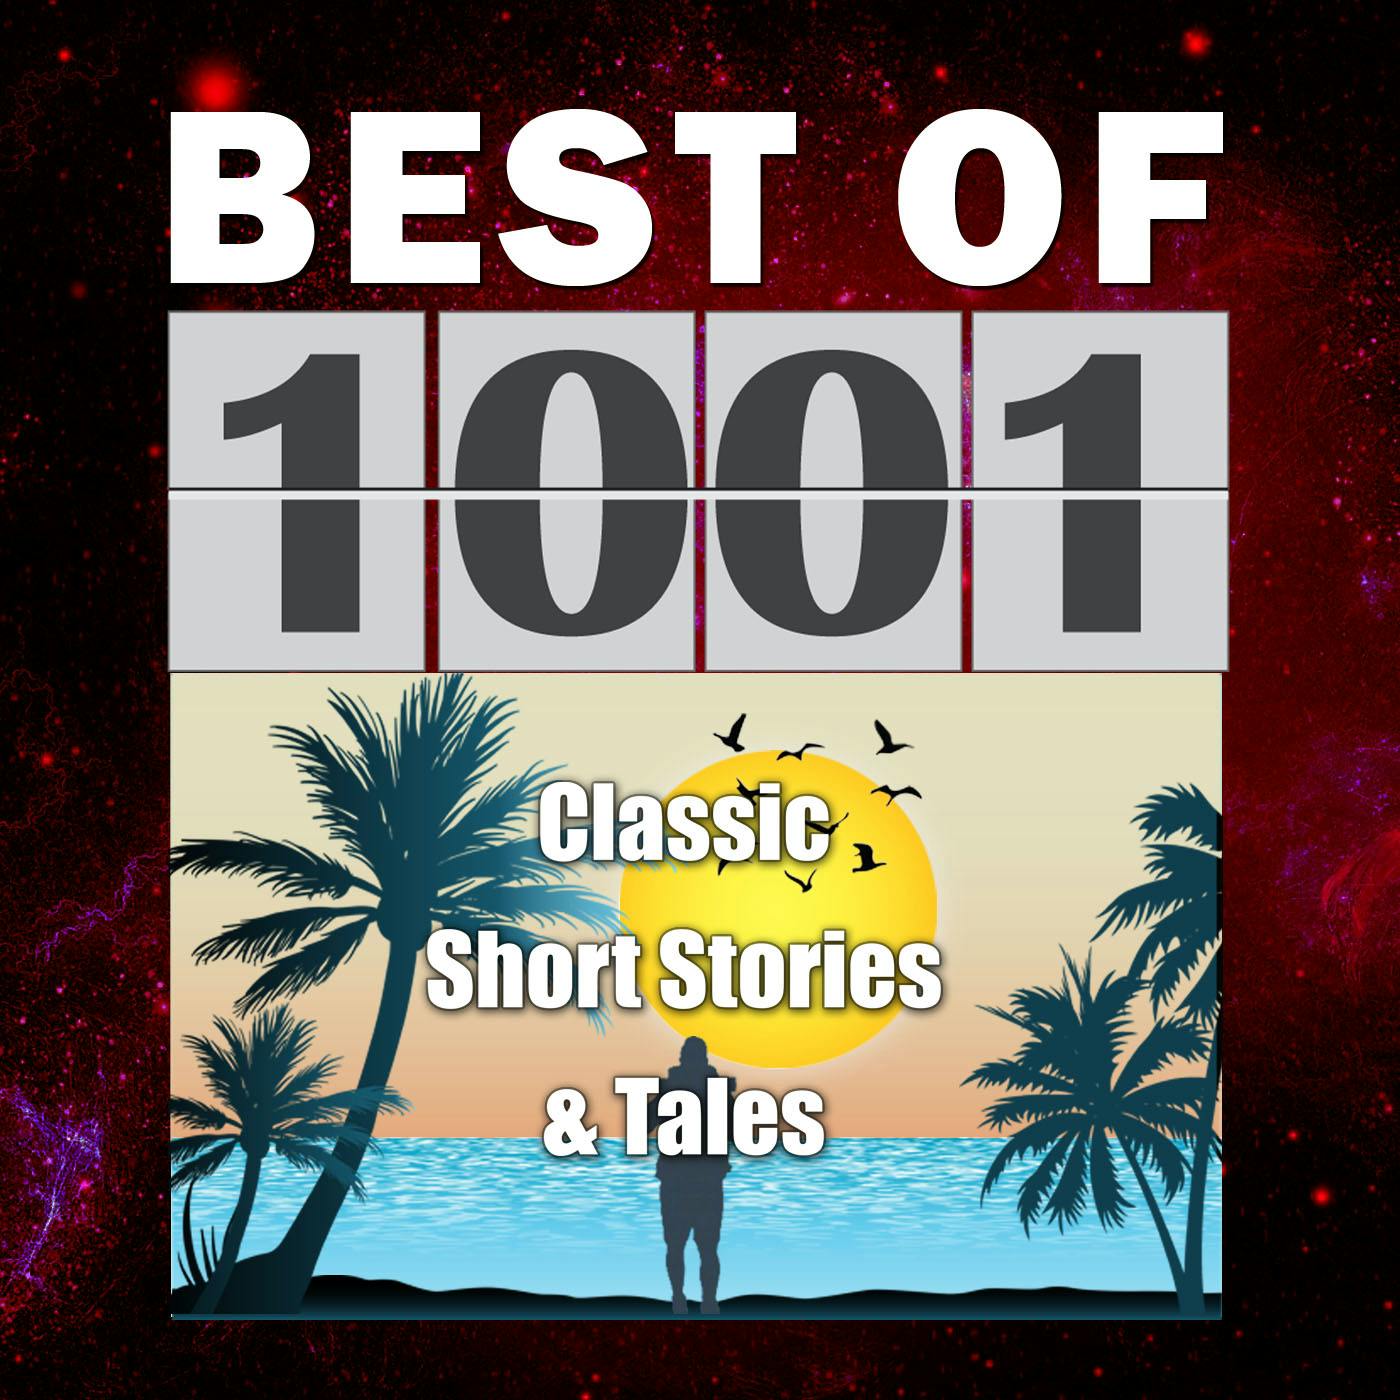 "1001 Classic Short Stories & Tales" Podcast